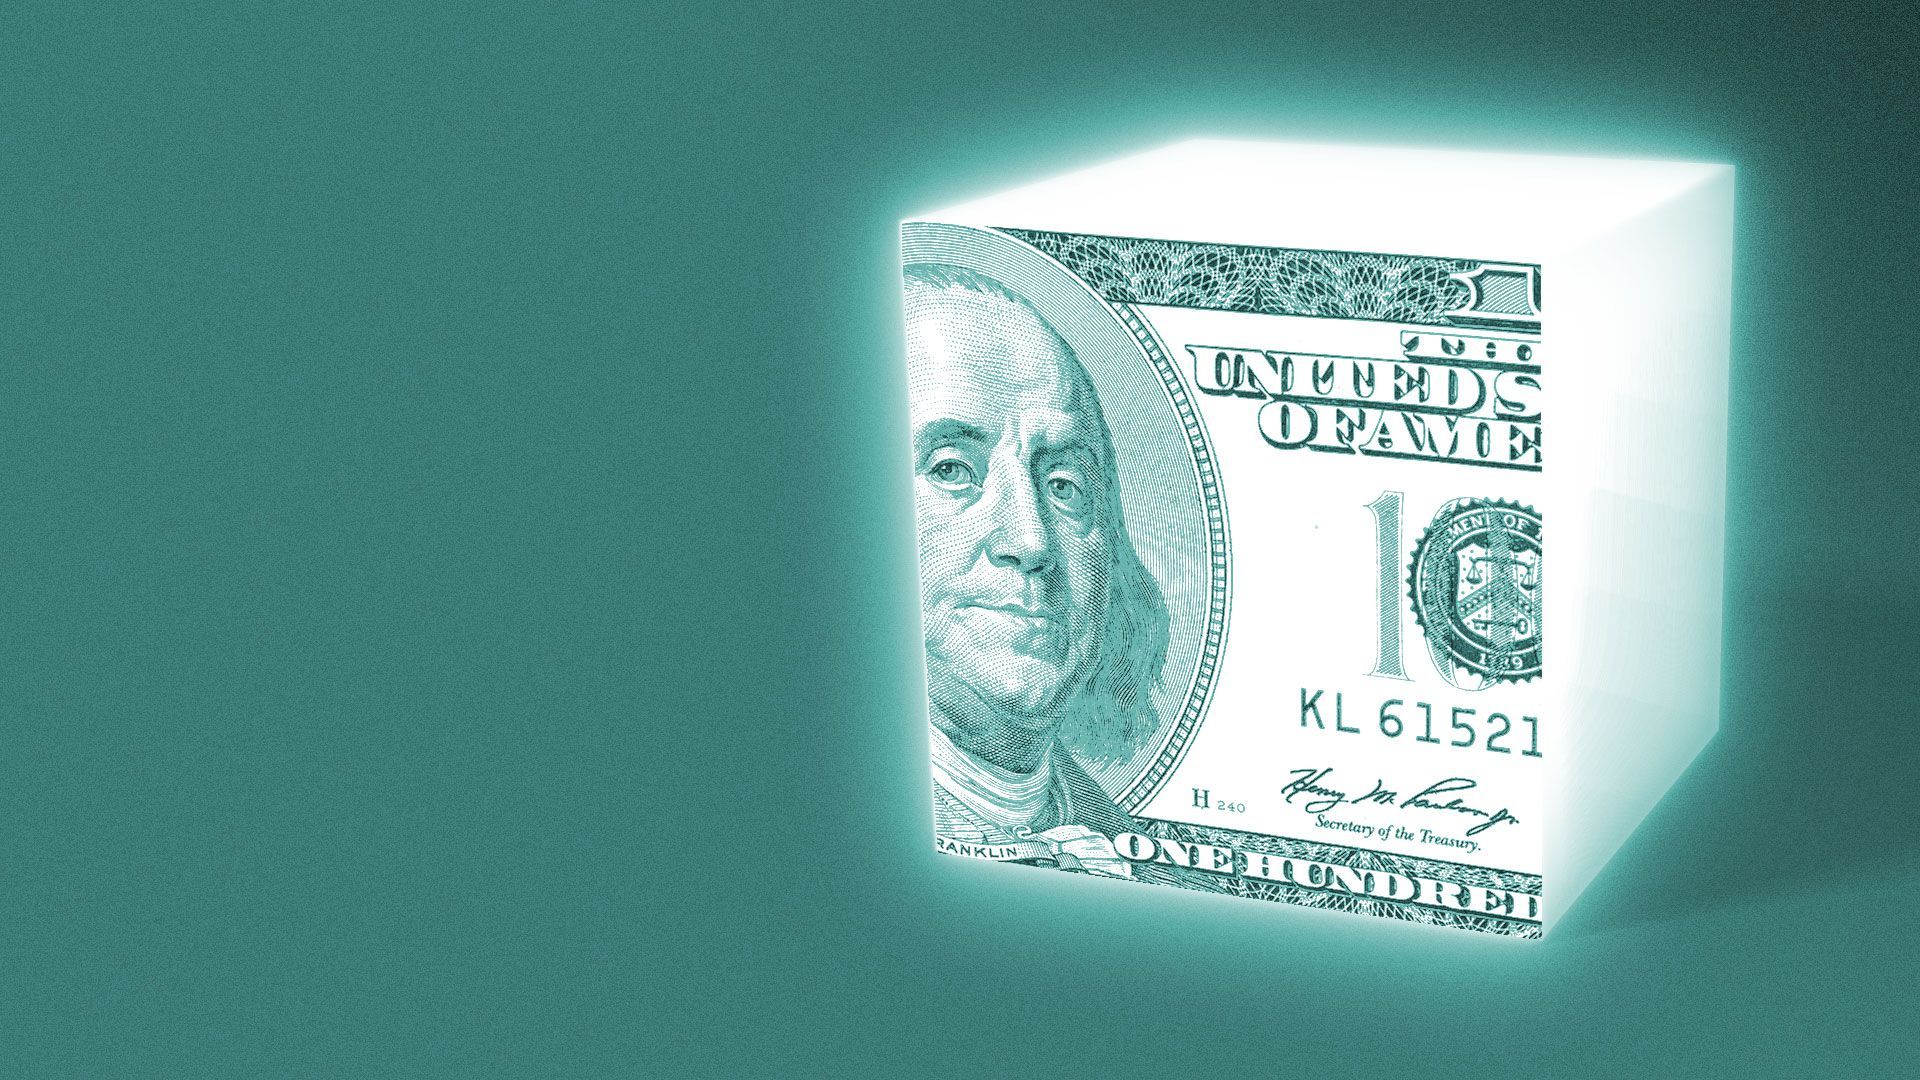 Illustration of a crypto block with an image of a one hundred dollar bill on one side.